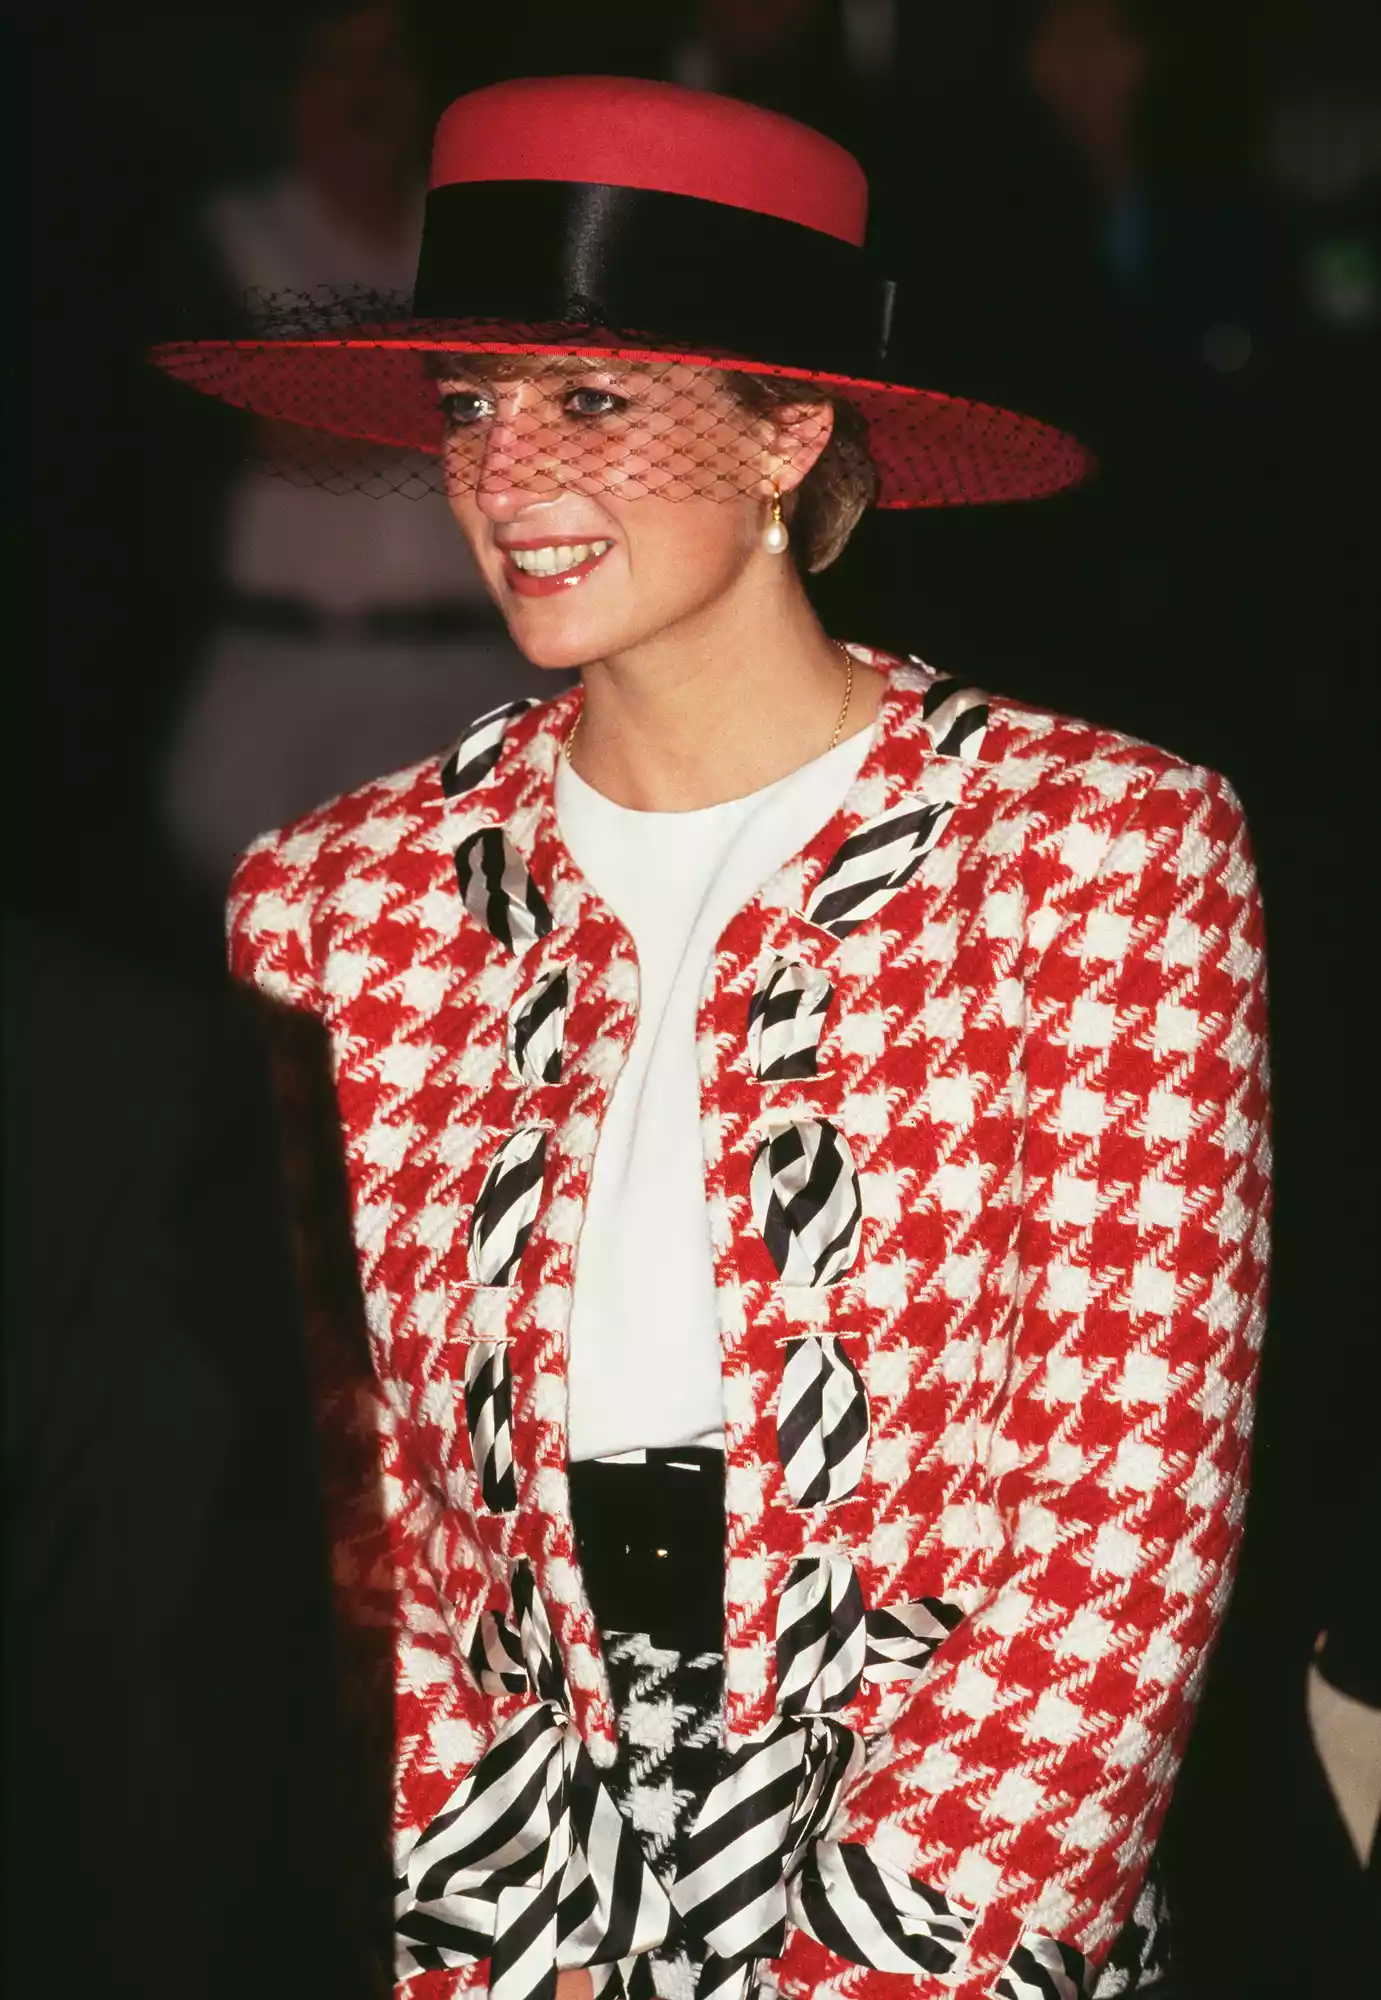 Diana, Princess of Wales (1961 - 1997) arrives at Toronto airport for an official visit to Canada, 23rd October 1991. She is wearing a red, white and black Moschino suit and a hat by Philip Somerville